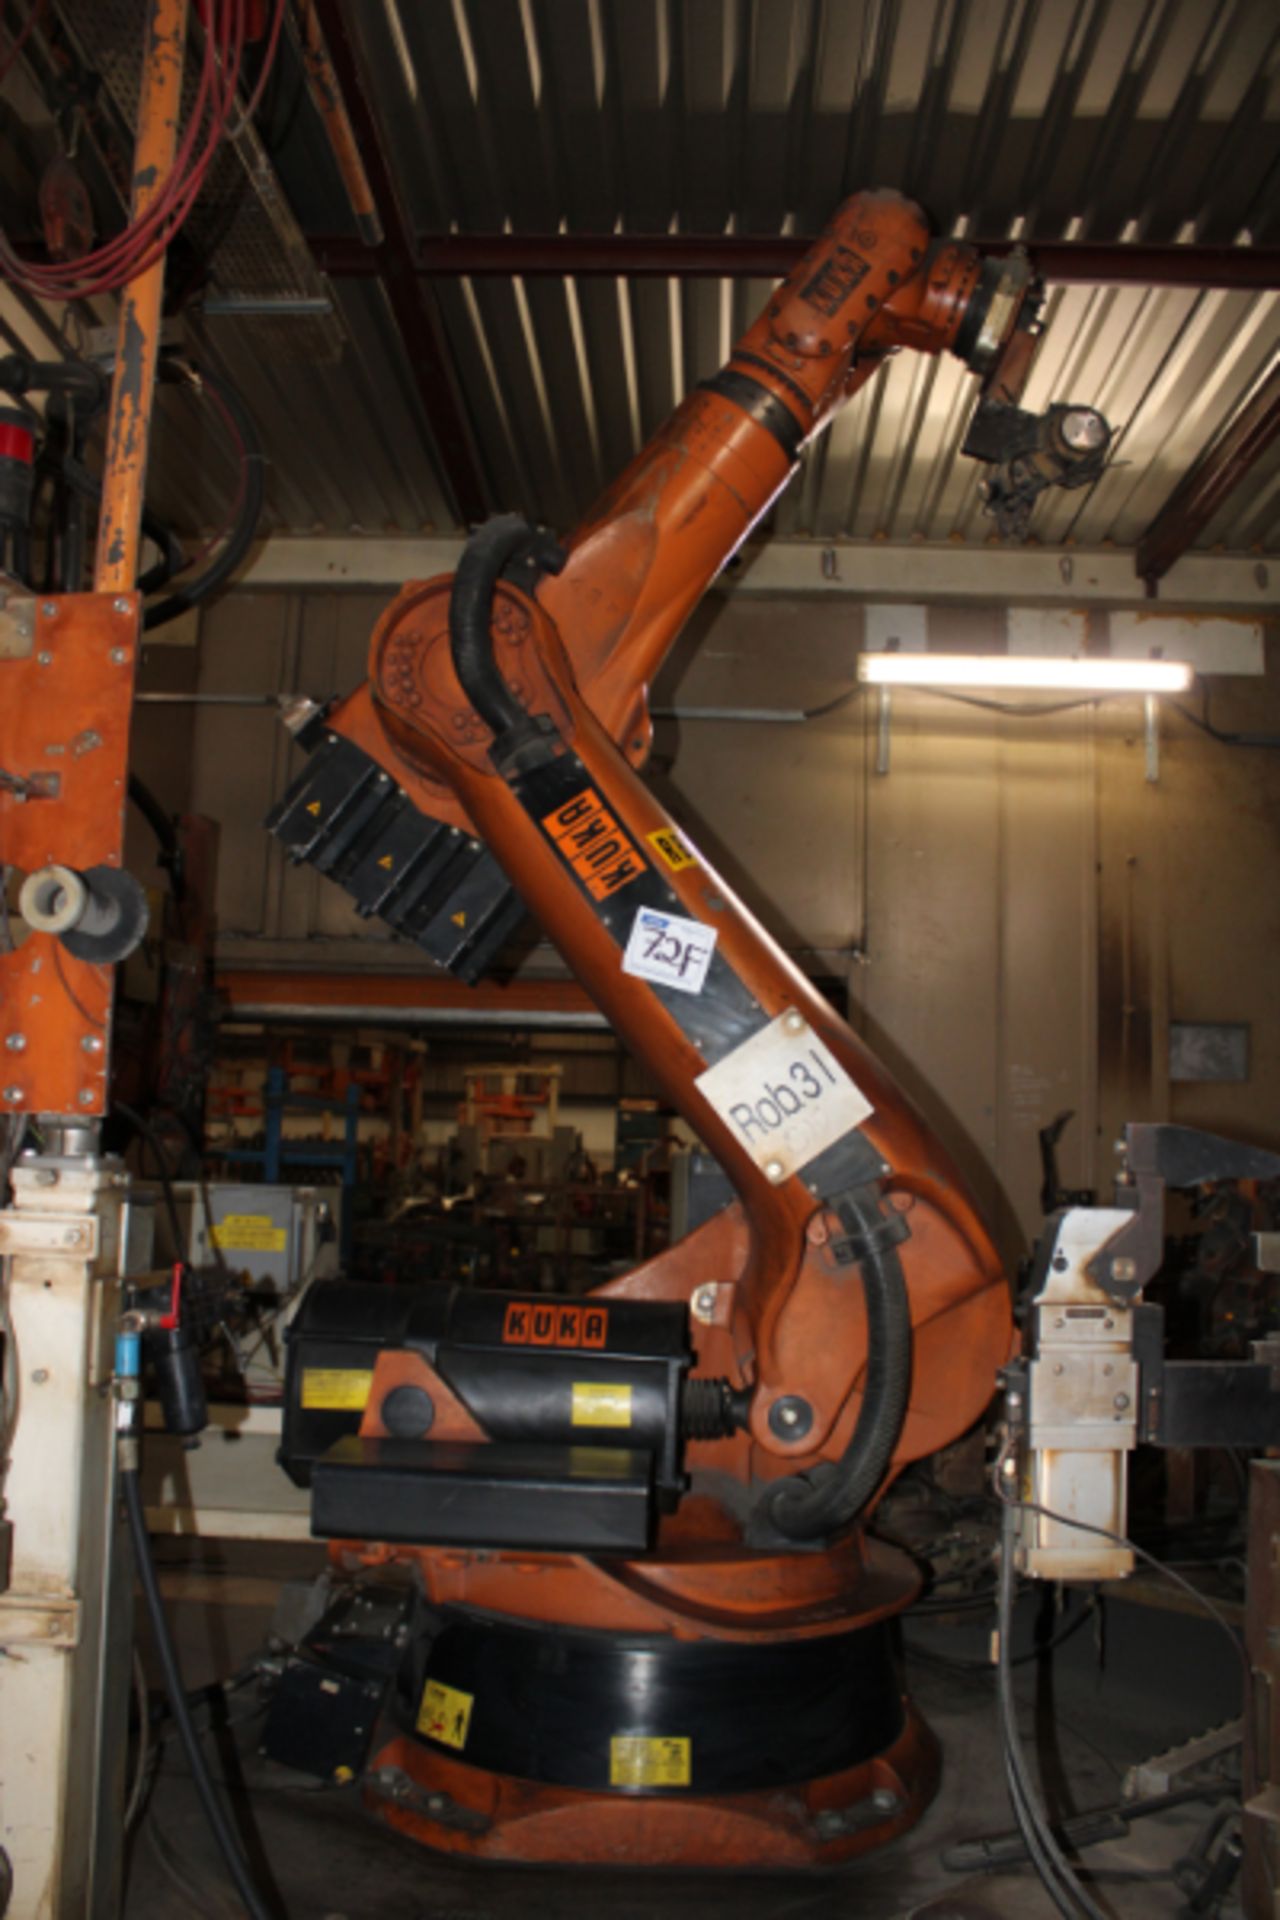 Kuka KR-150 Robot, Maximum Reach: 2,700 mm, Rated Payload: 150 Kg, with Robot Controller, New 2003 - Image 3 of 6